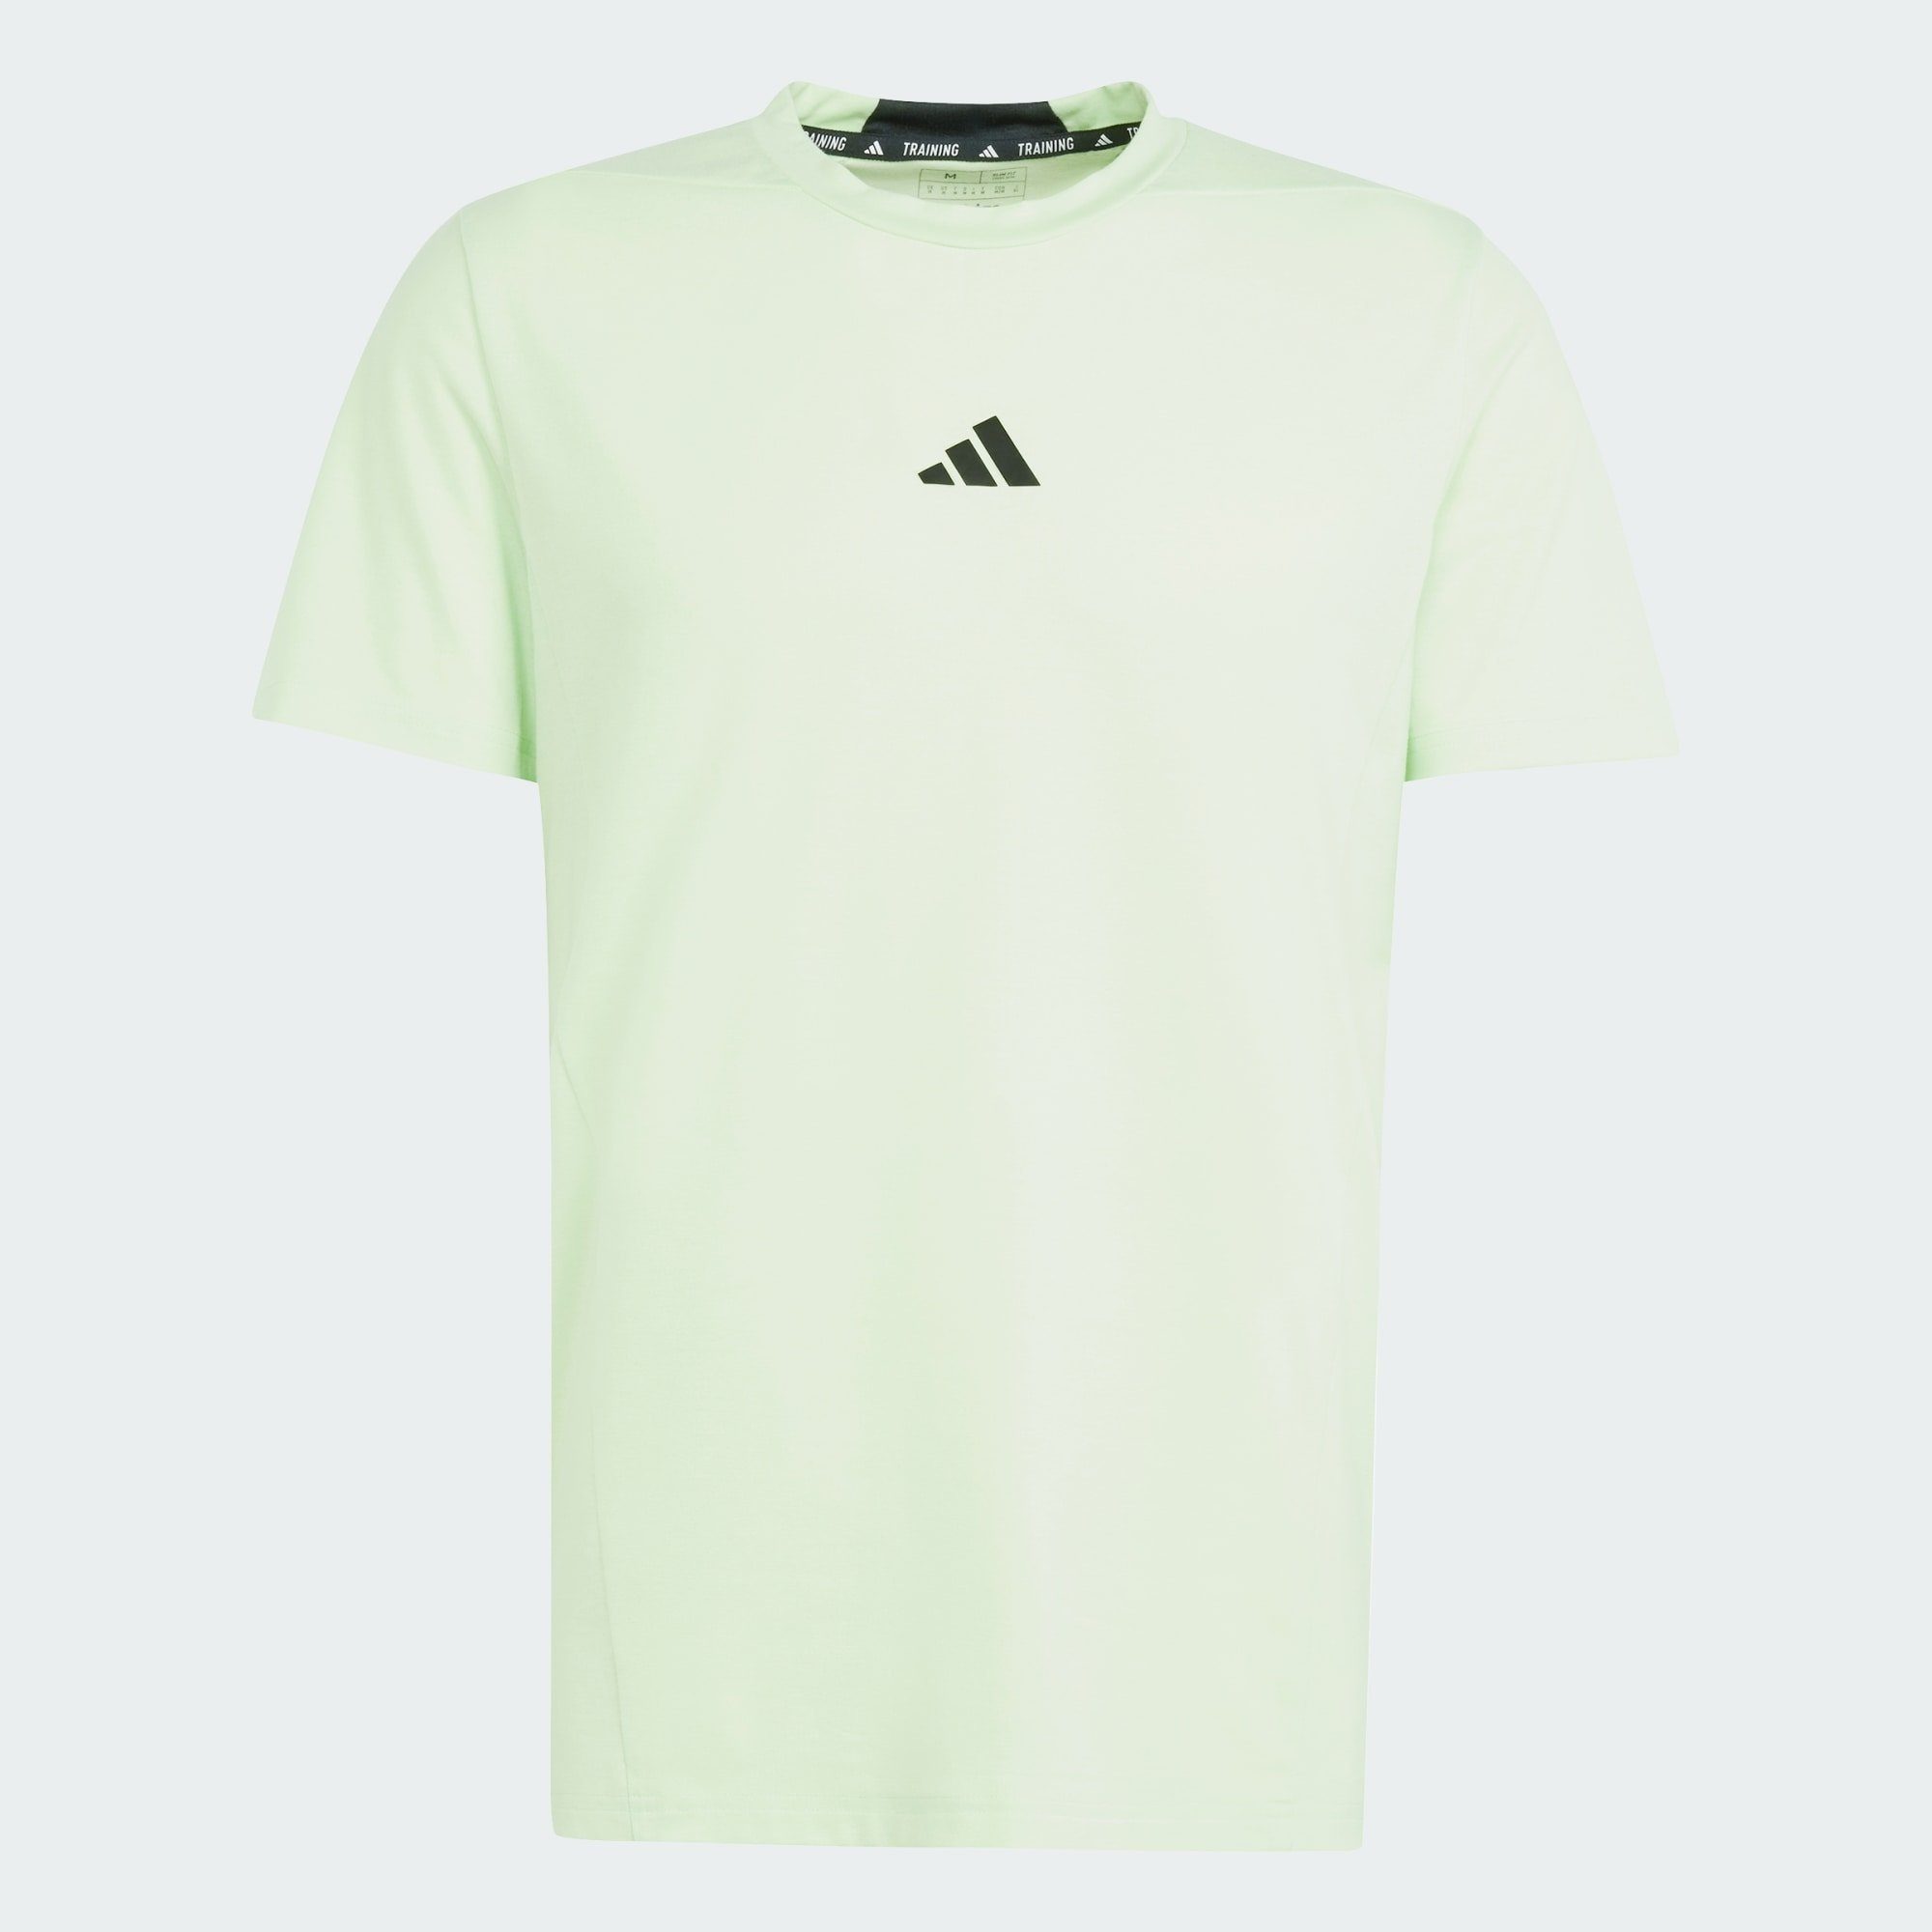 Funktionsshirt Semi DESIGNED WORKOUT FOR Performance T-SHIRT Spark adidas Green TRAINING